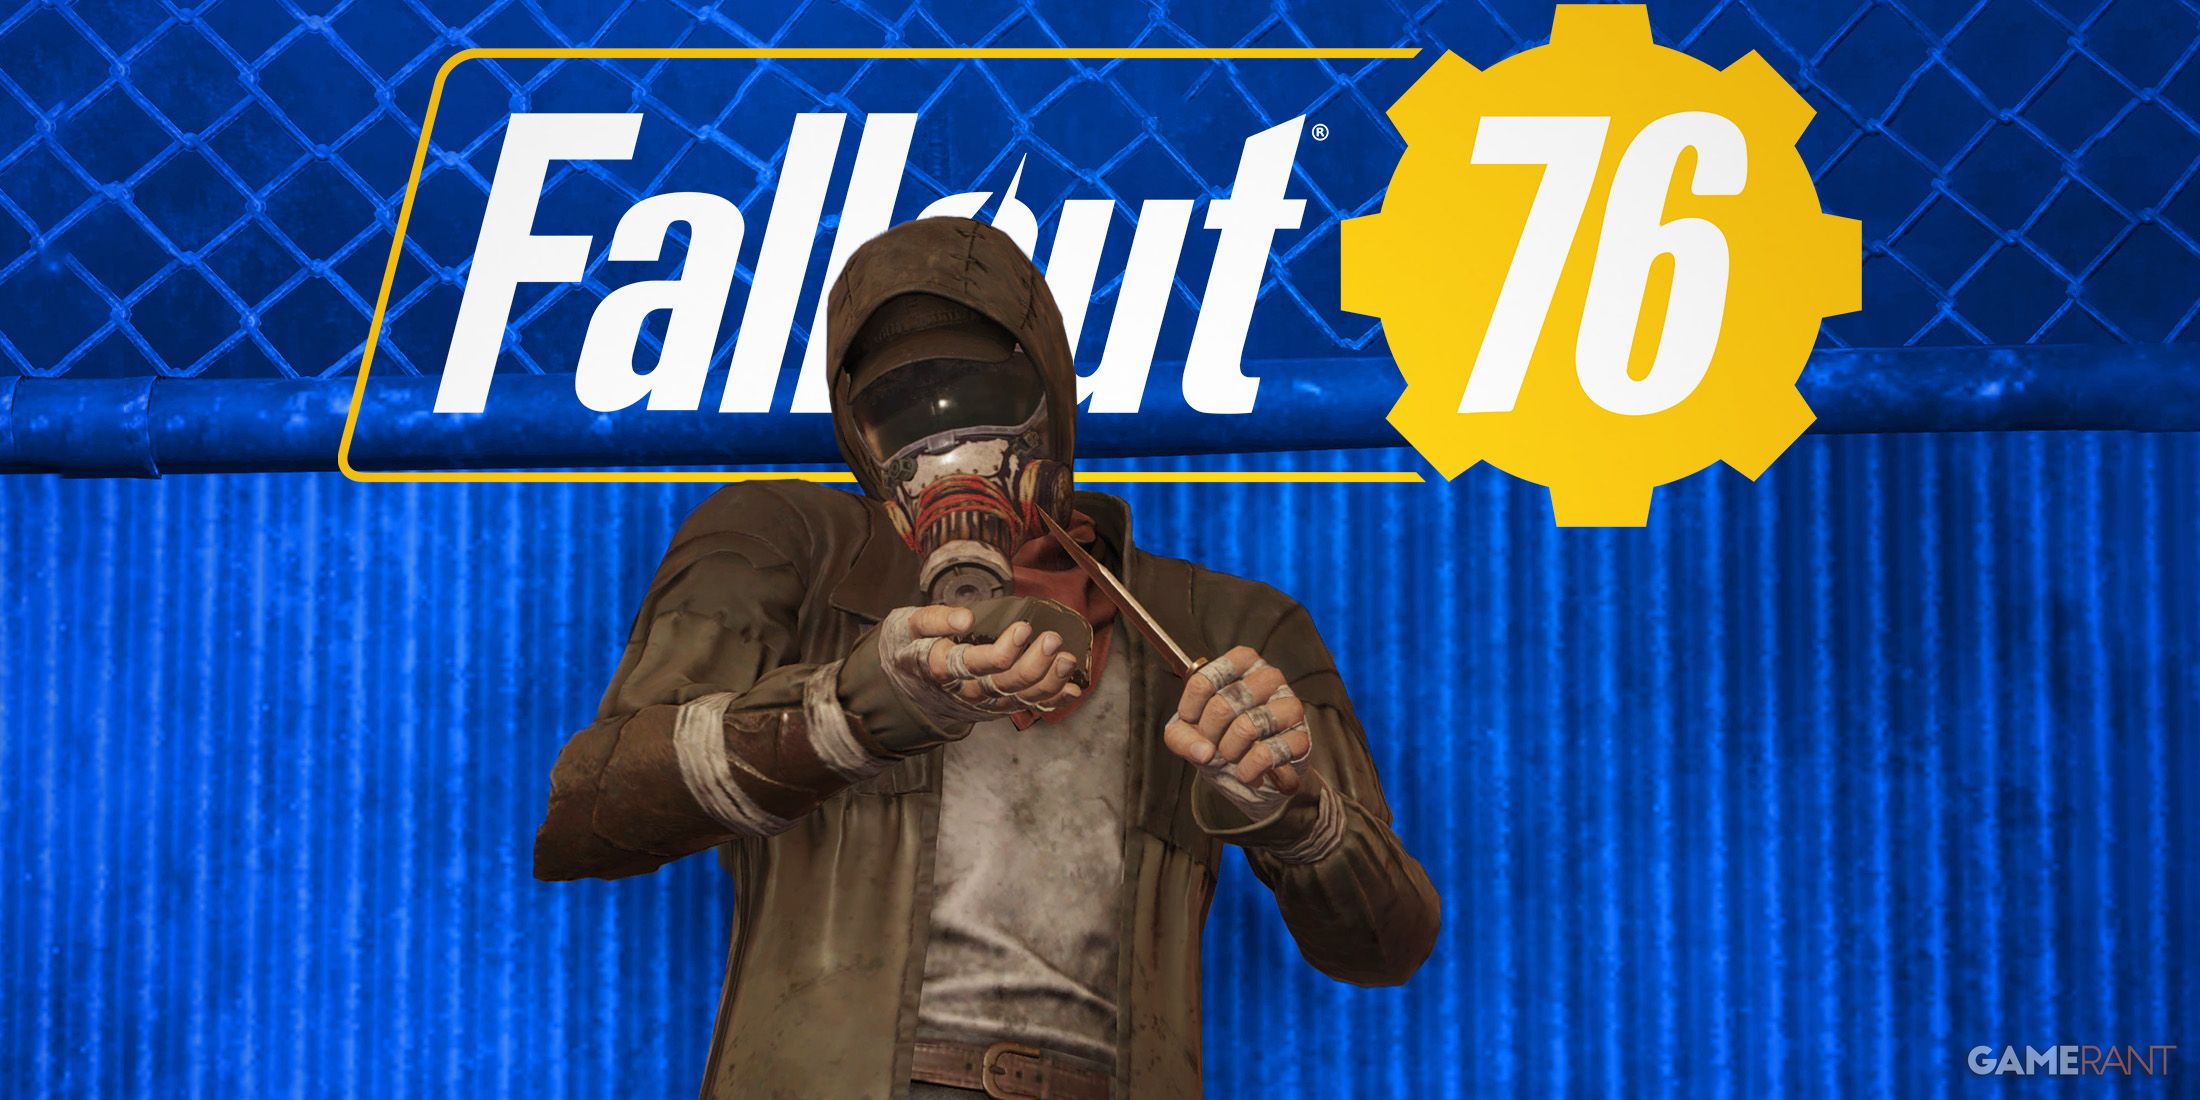 Fallout 76 The Pitt The Trench Expedition Danilo wielding knife while leaning on fence blue background game logo edit